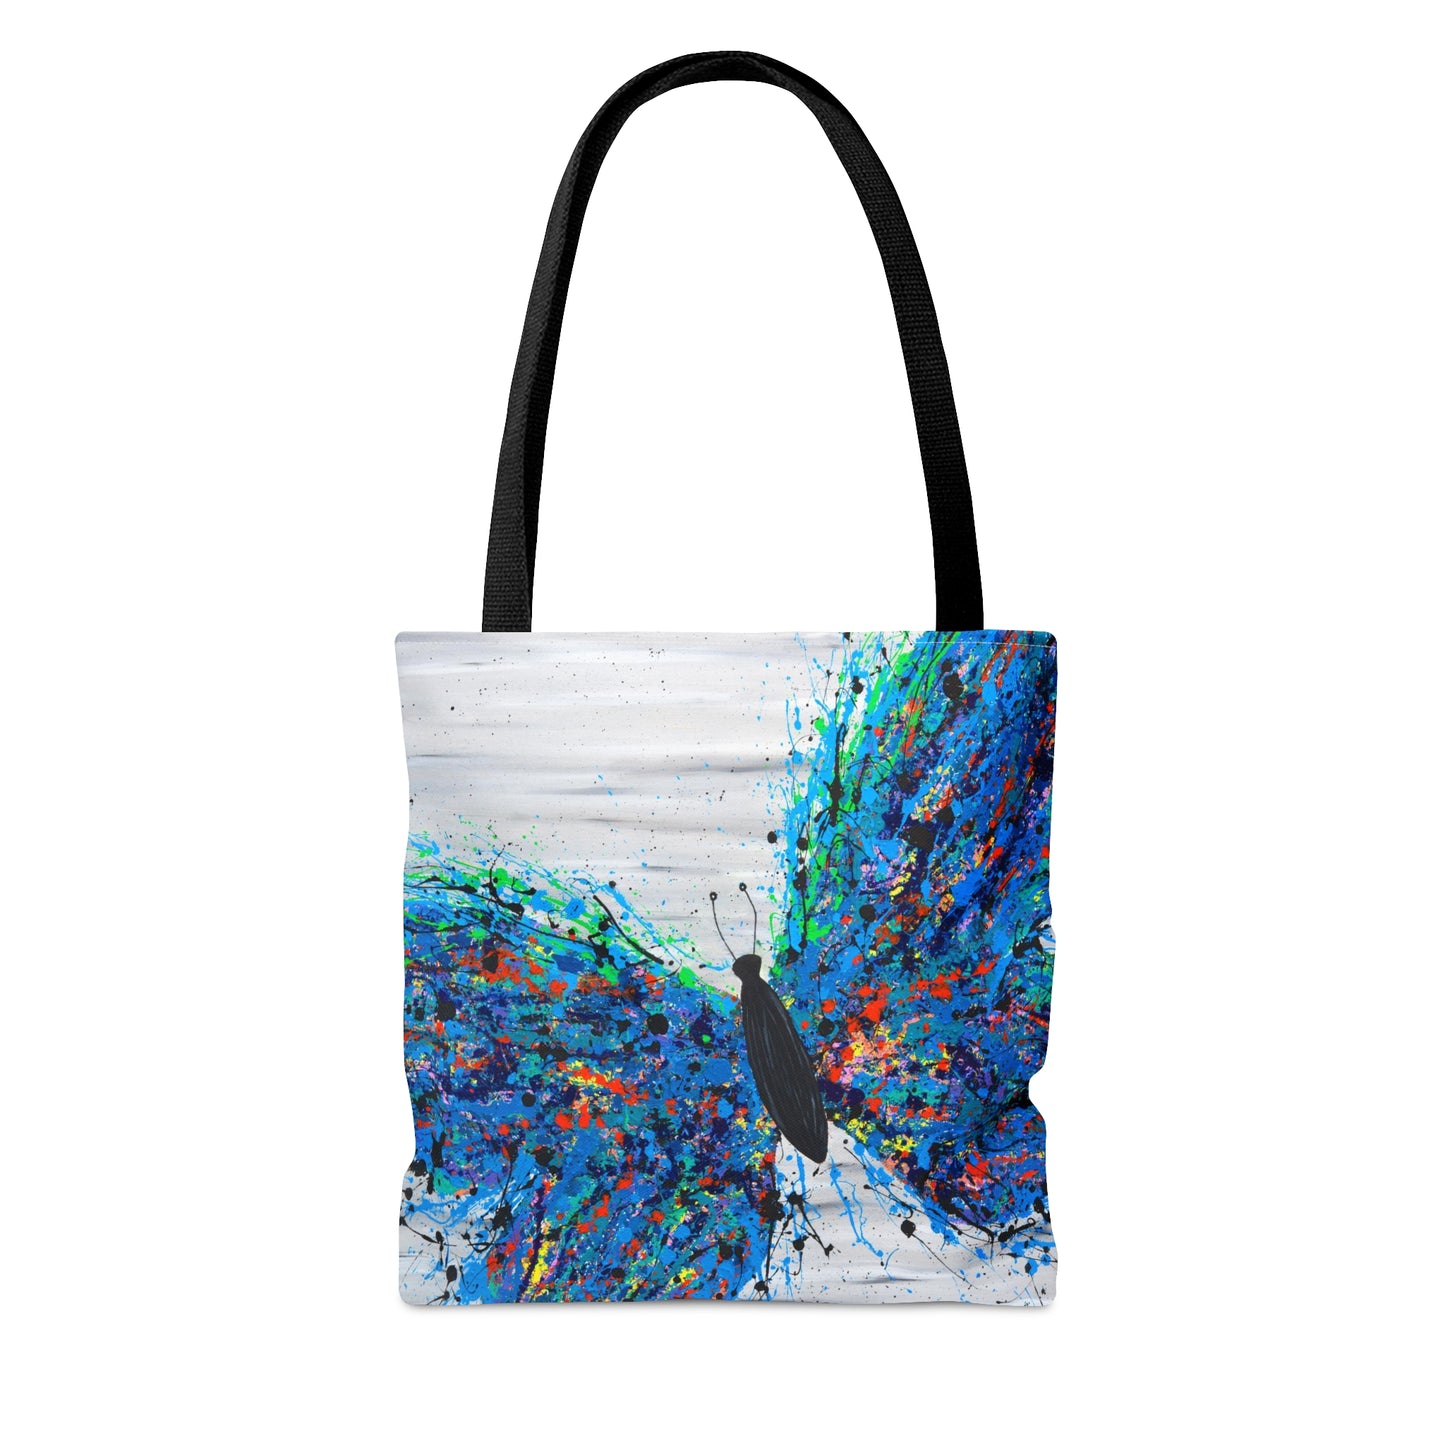 Tote Bag - WILD BUTTERFLY